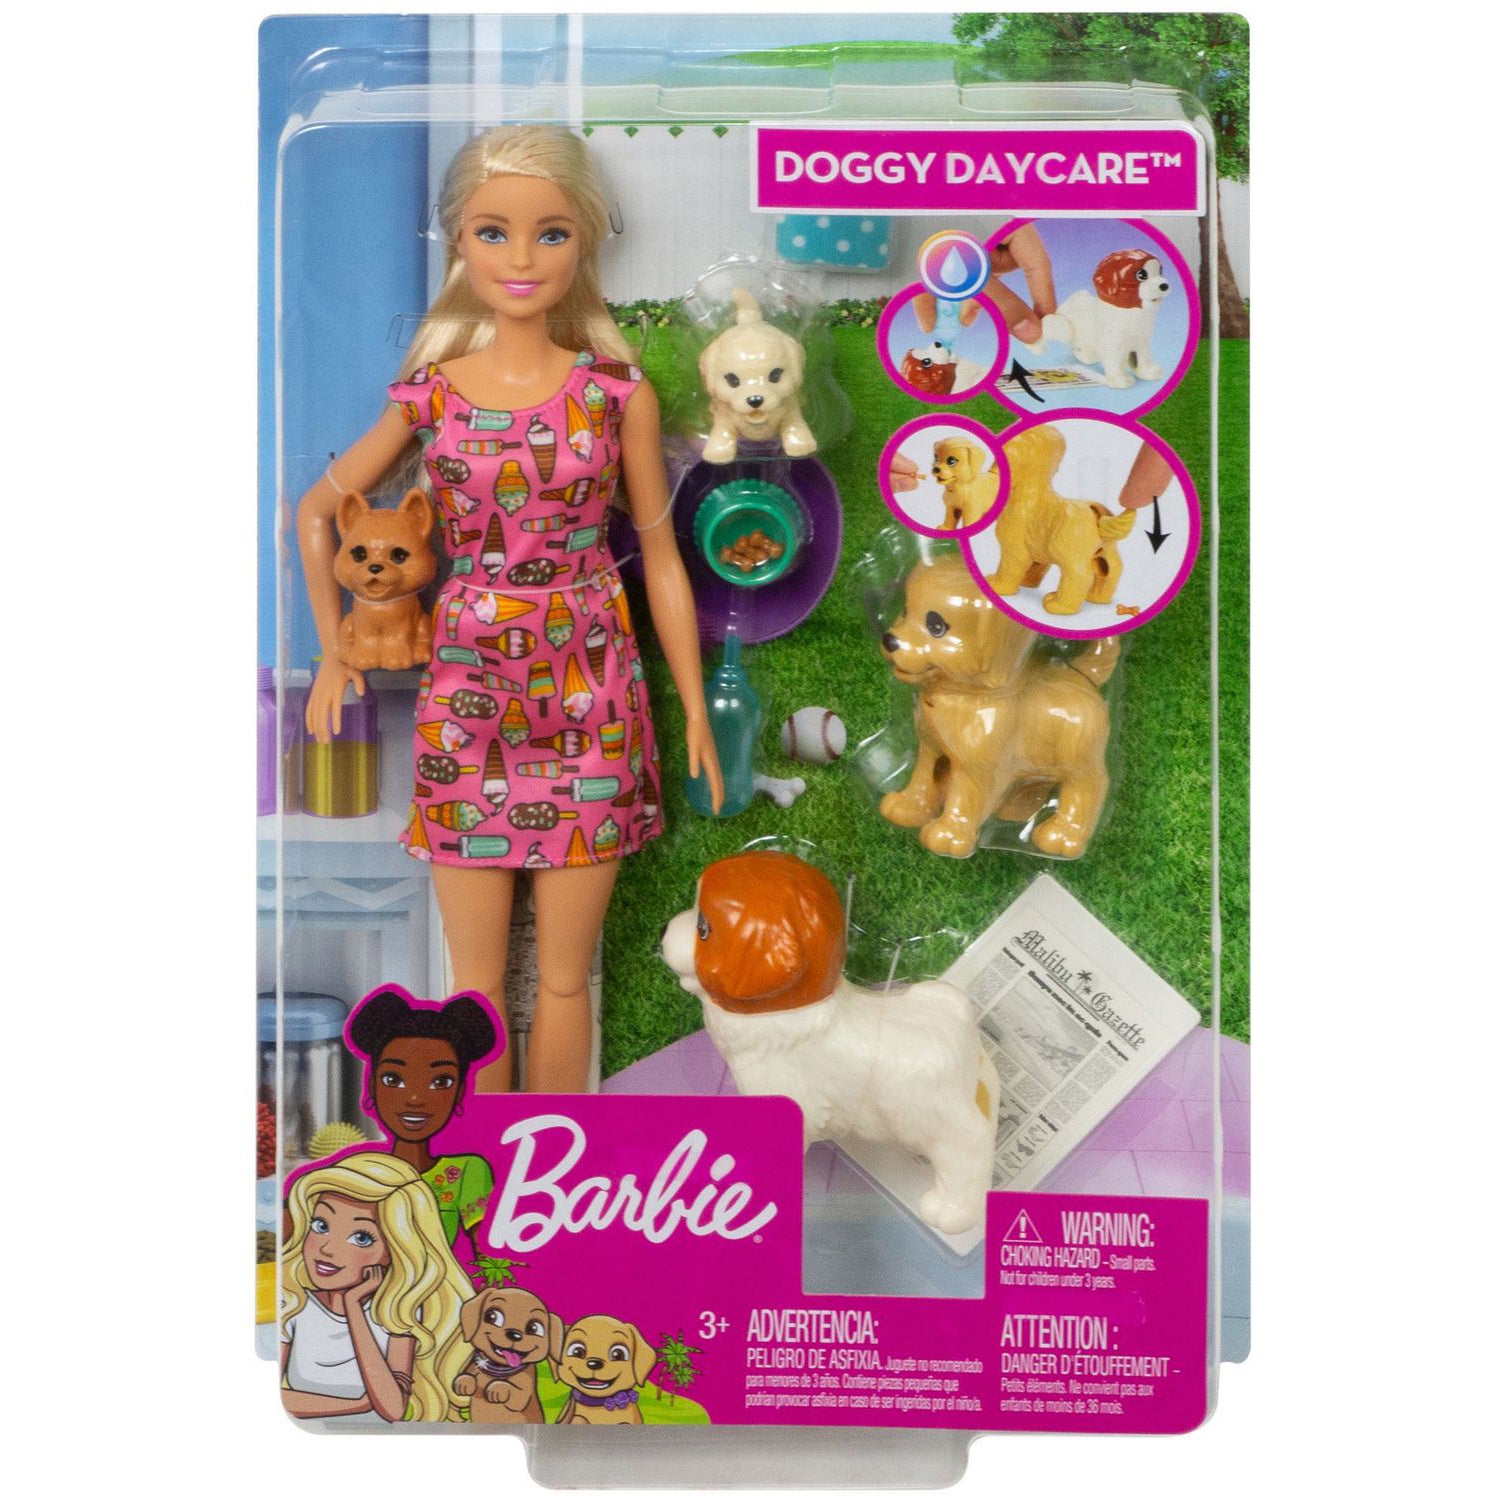 Barbie Doggy Daycare Doll and Pets Playset